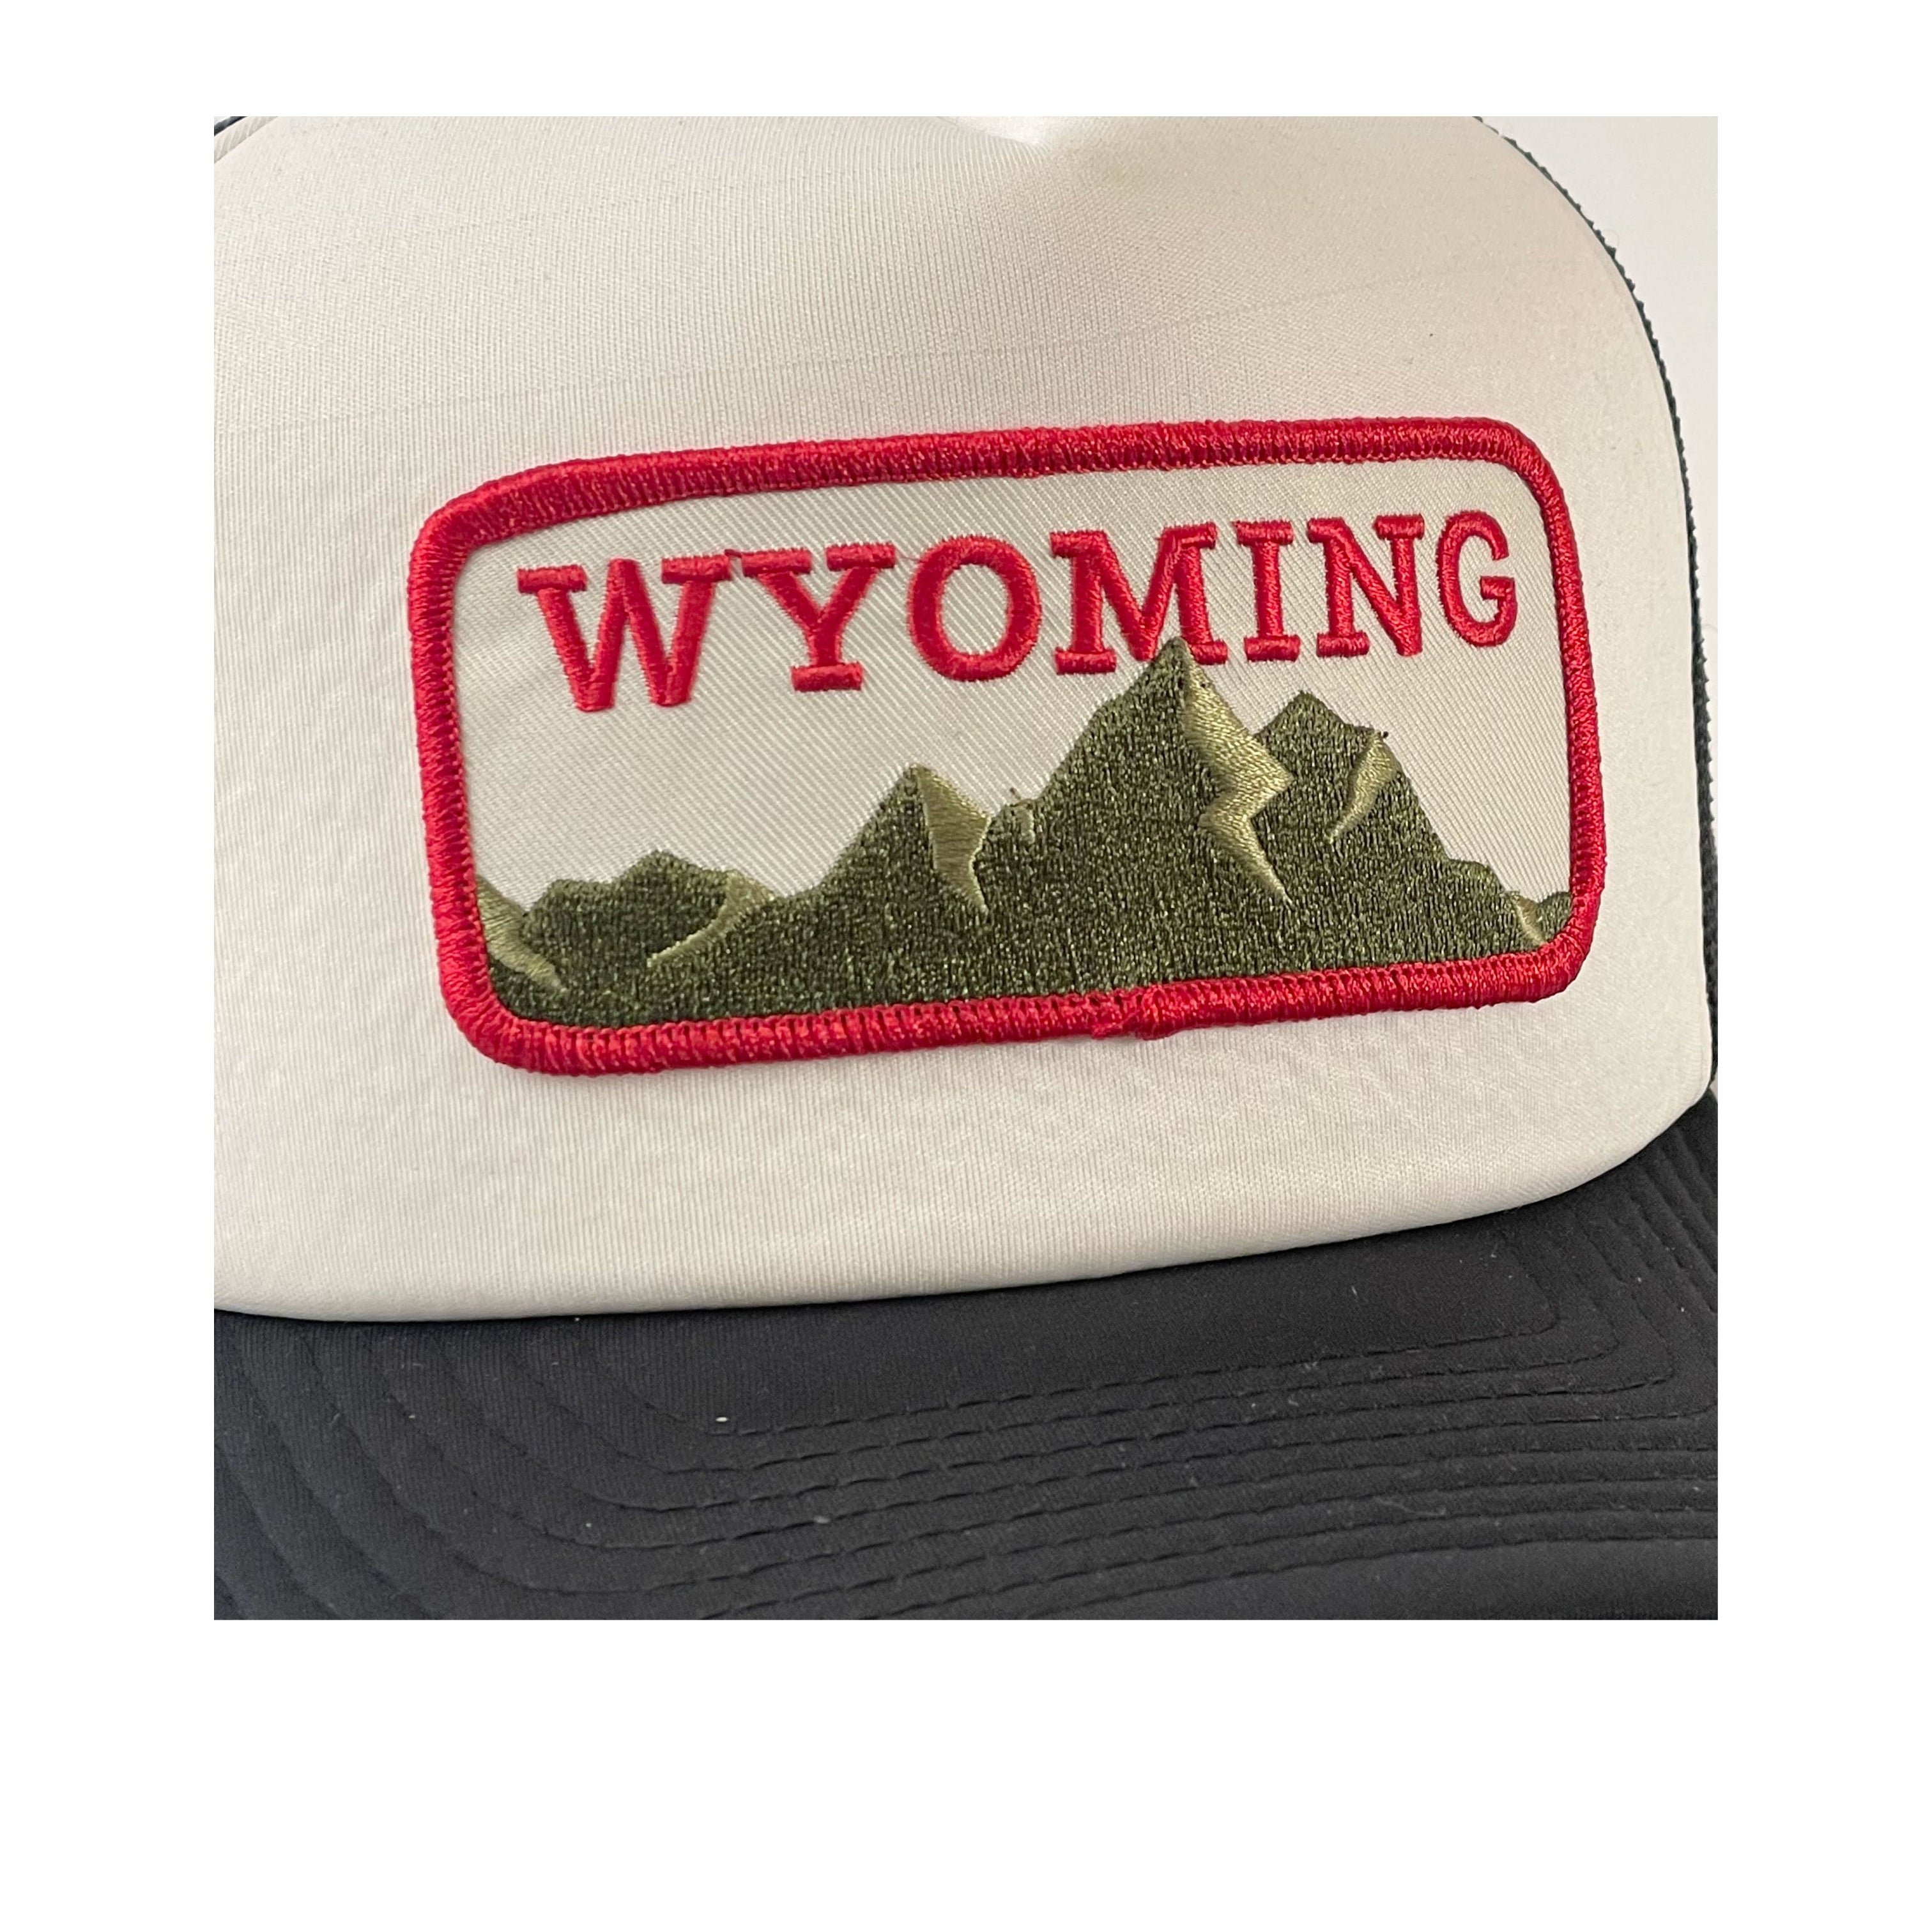 White and Black Foam Trucker Wyoming Mountain Patch Hat